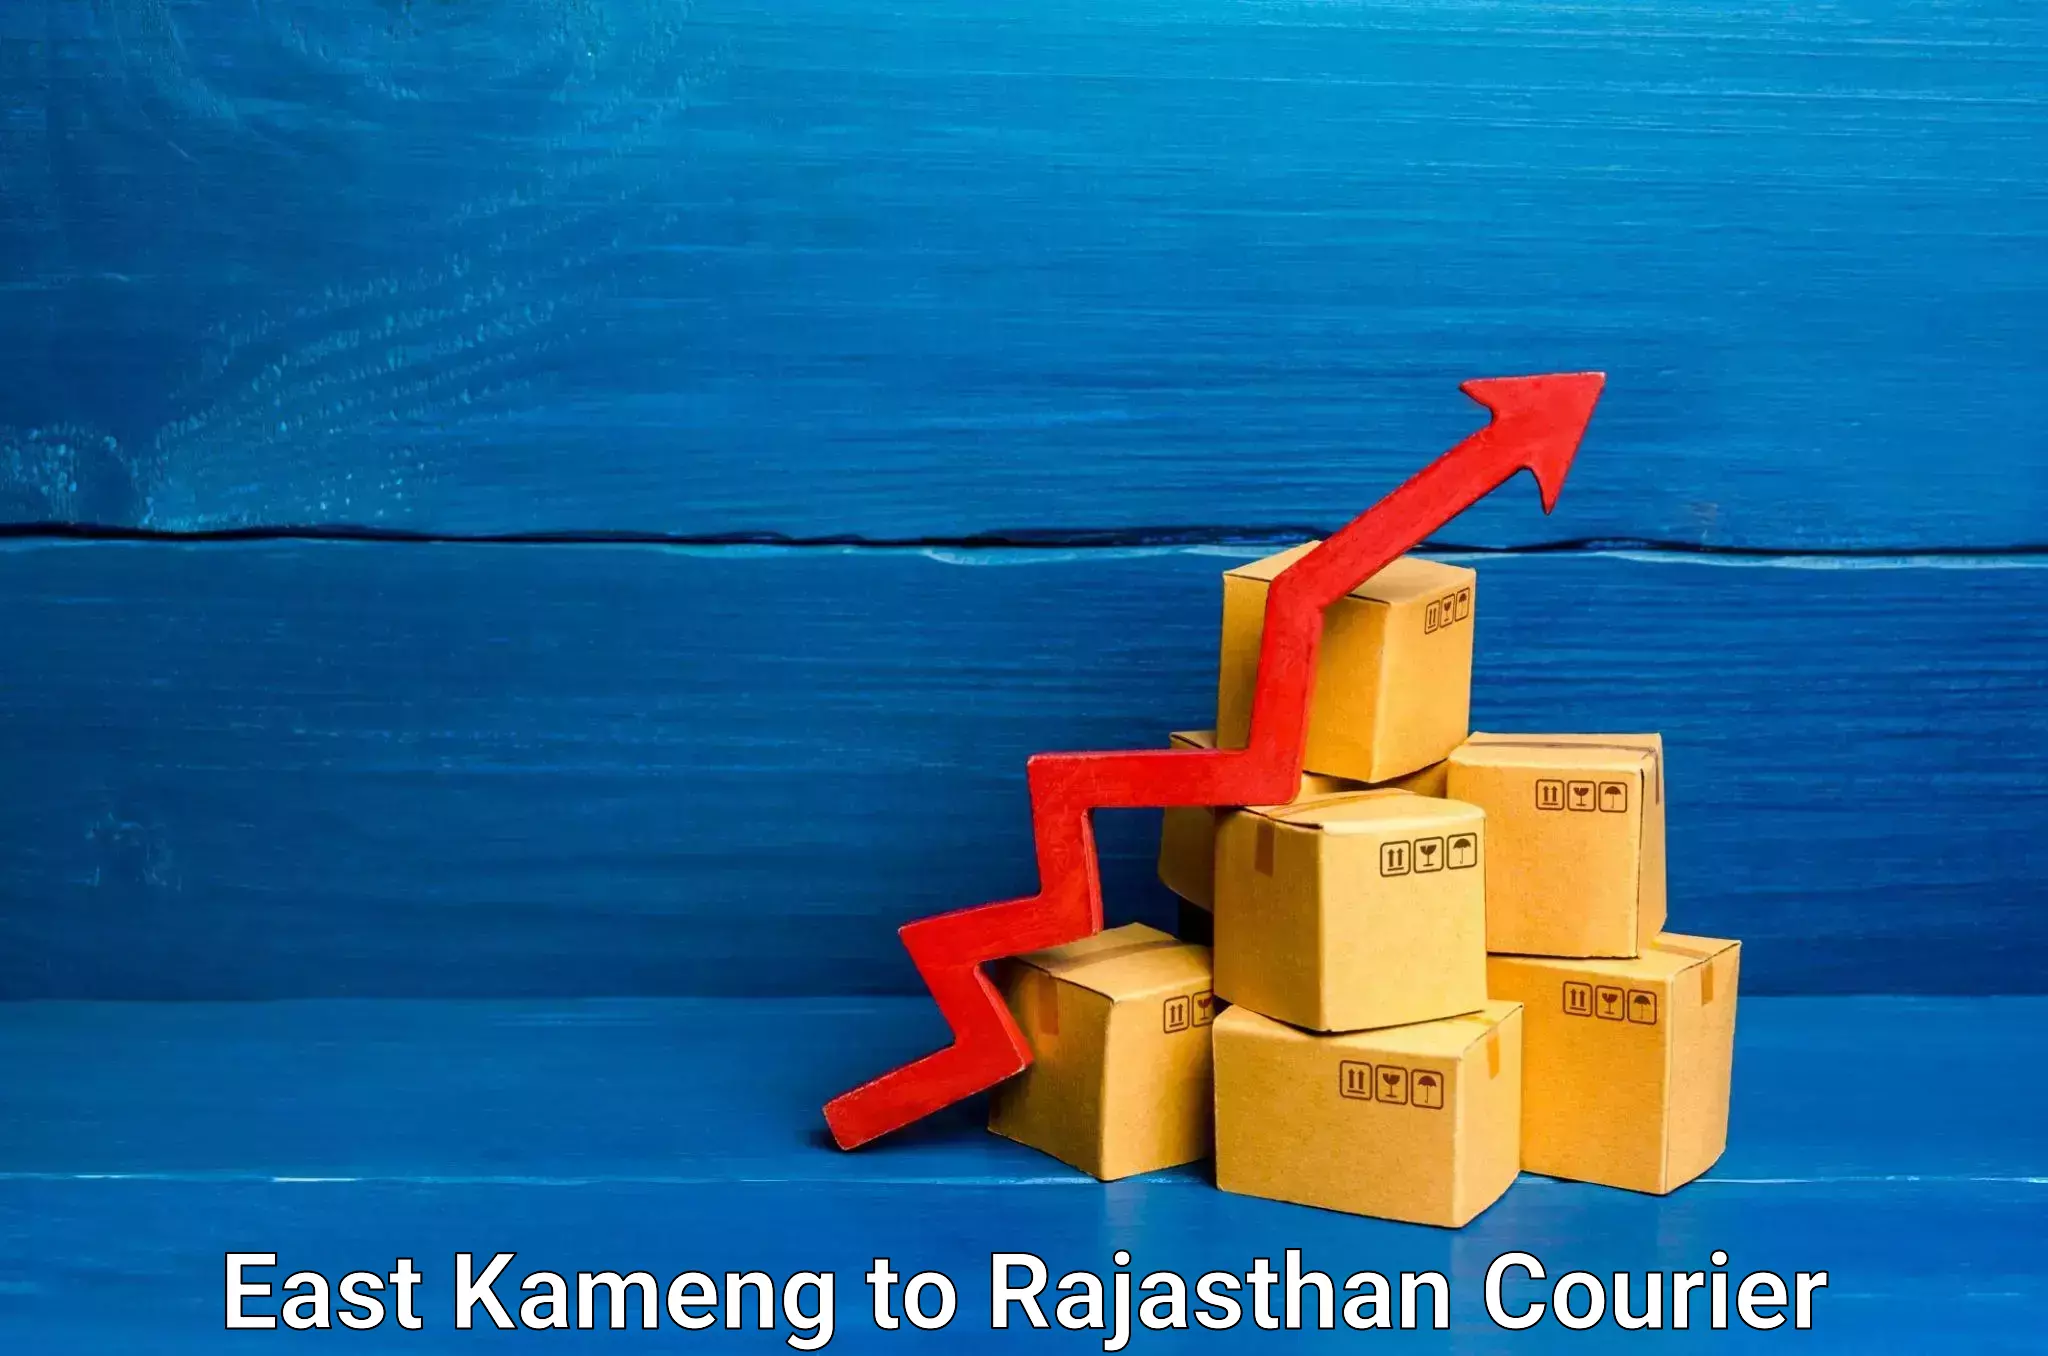 Global shipping networks East Kameng to Dholpur